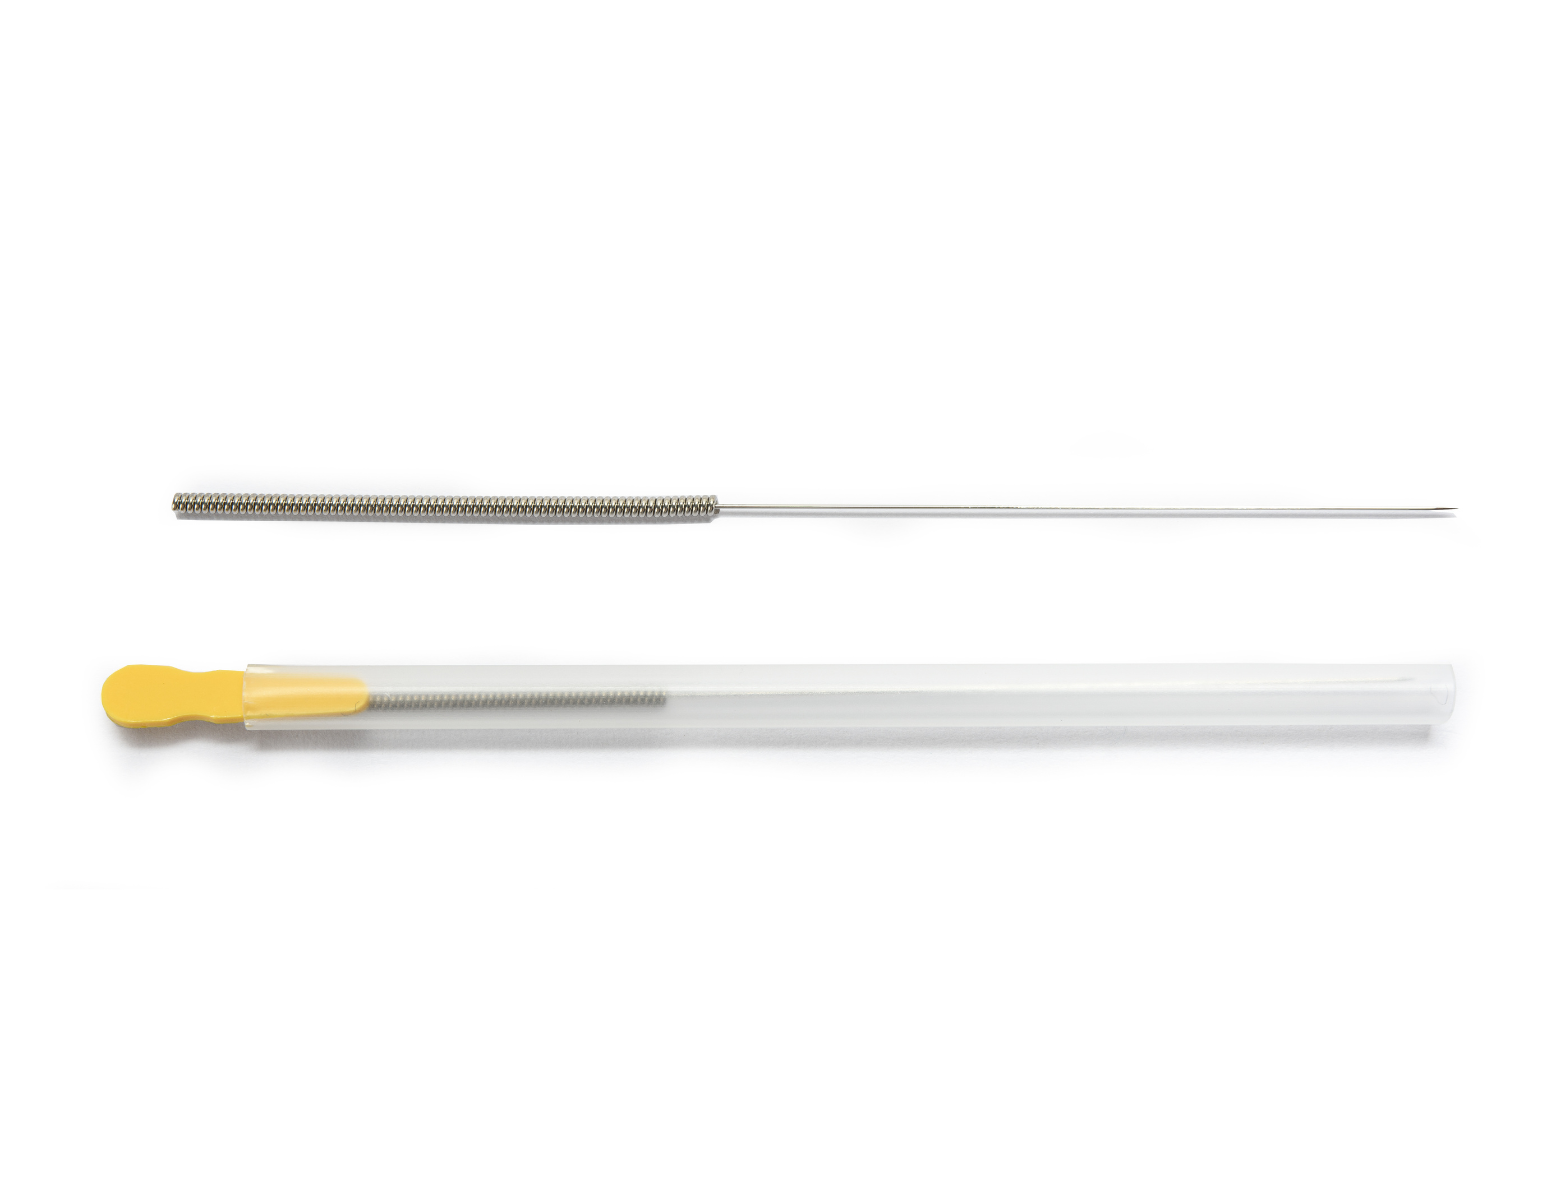 AguPunt APS Fascia / Superficial dry needling naald  - 0.16 x 13 mm (100 st)